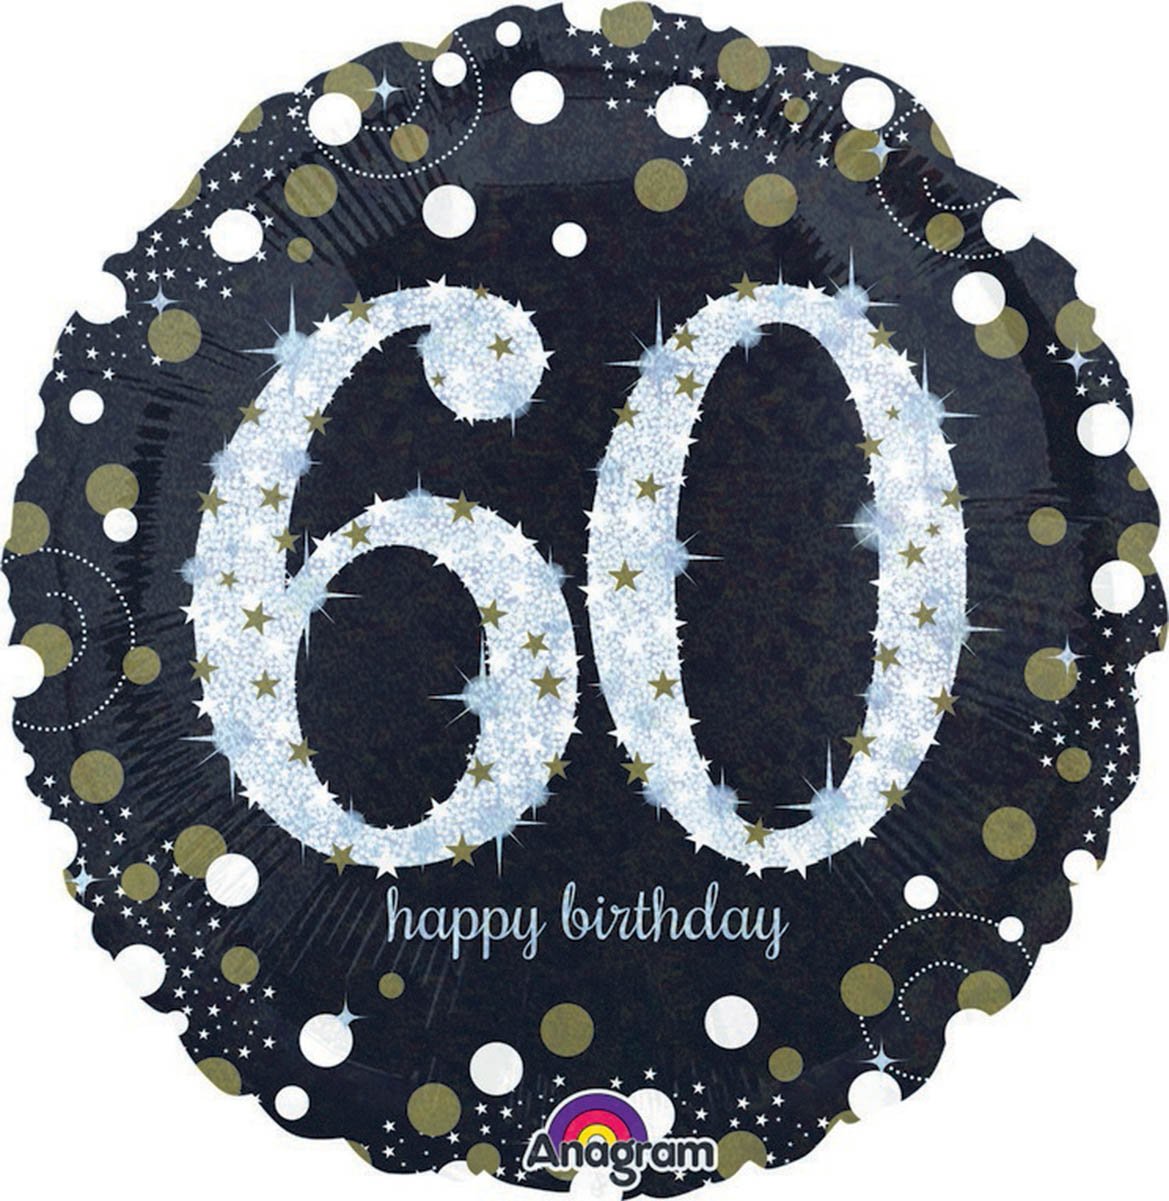 60th birthday party round foil balloon in black, silver and gold. 